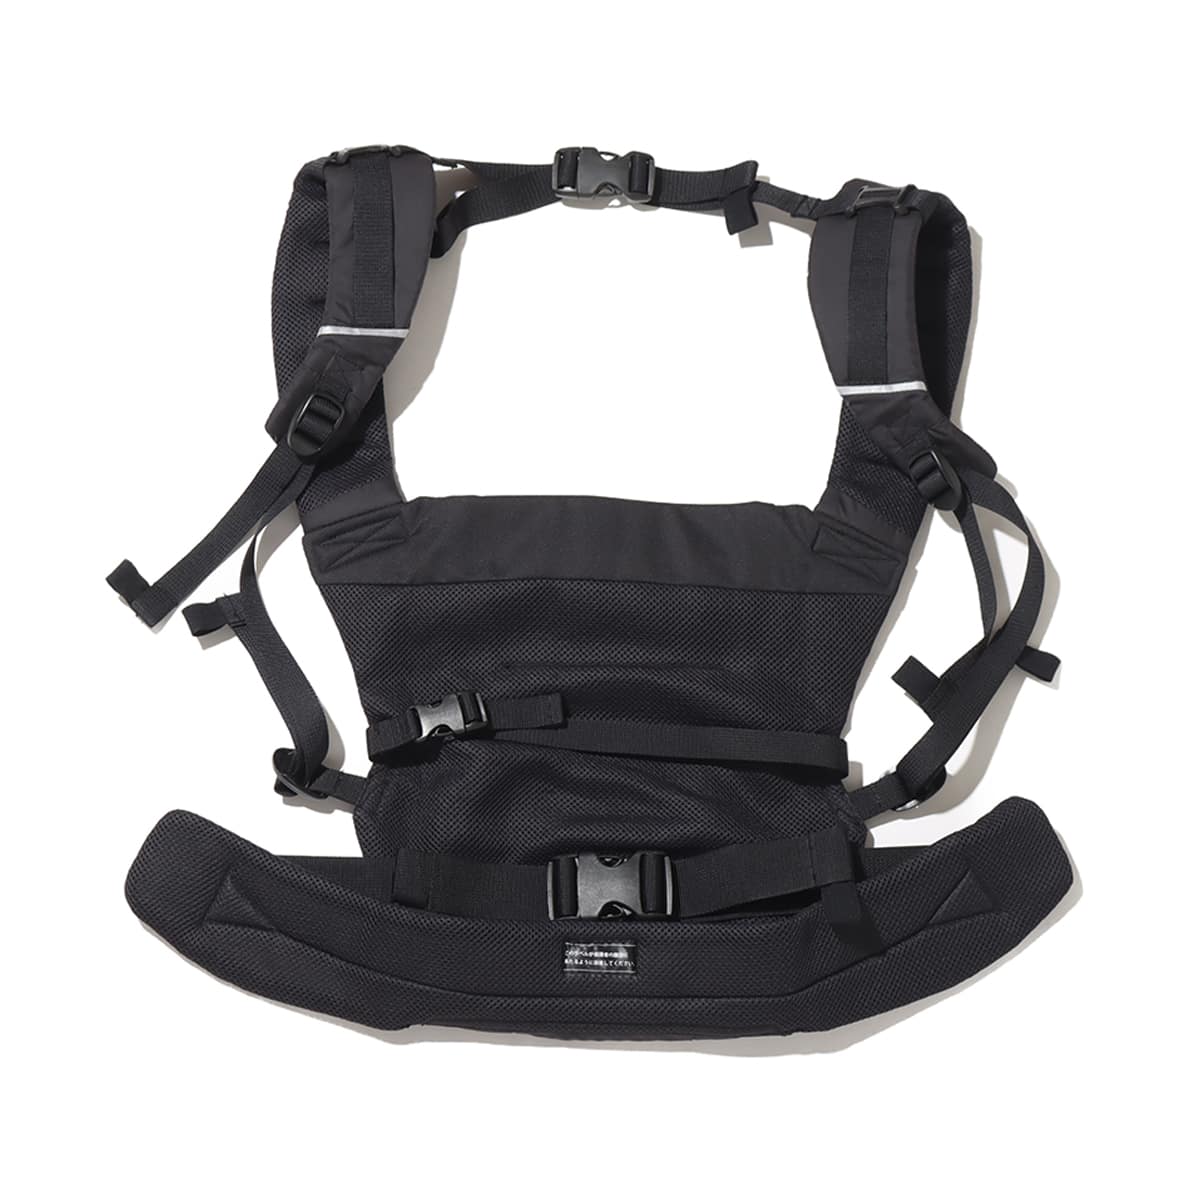 THE NORTH FACE BABY COMPACT CARRIER BLACK